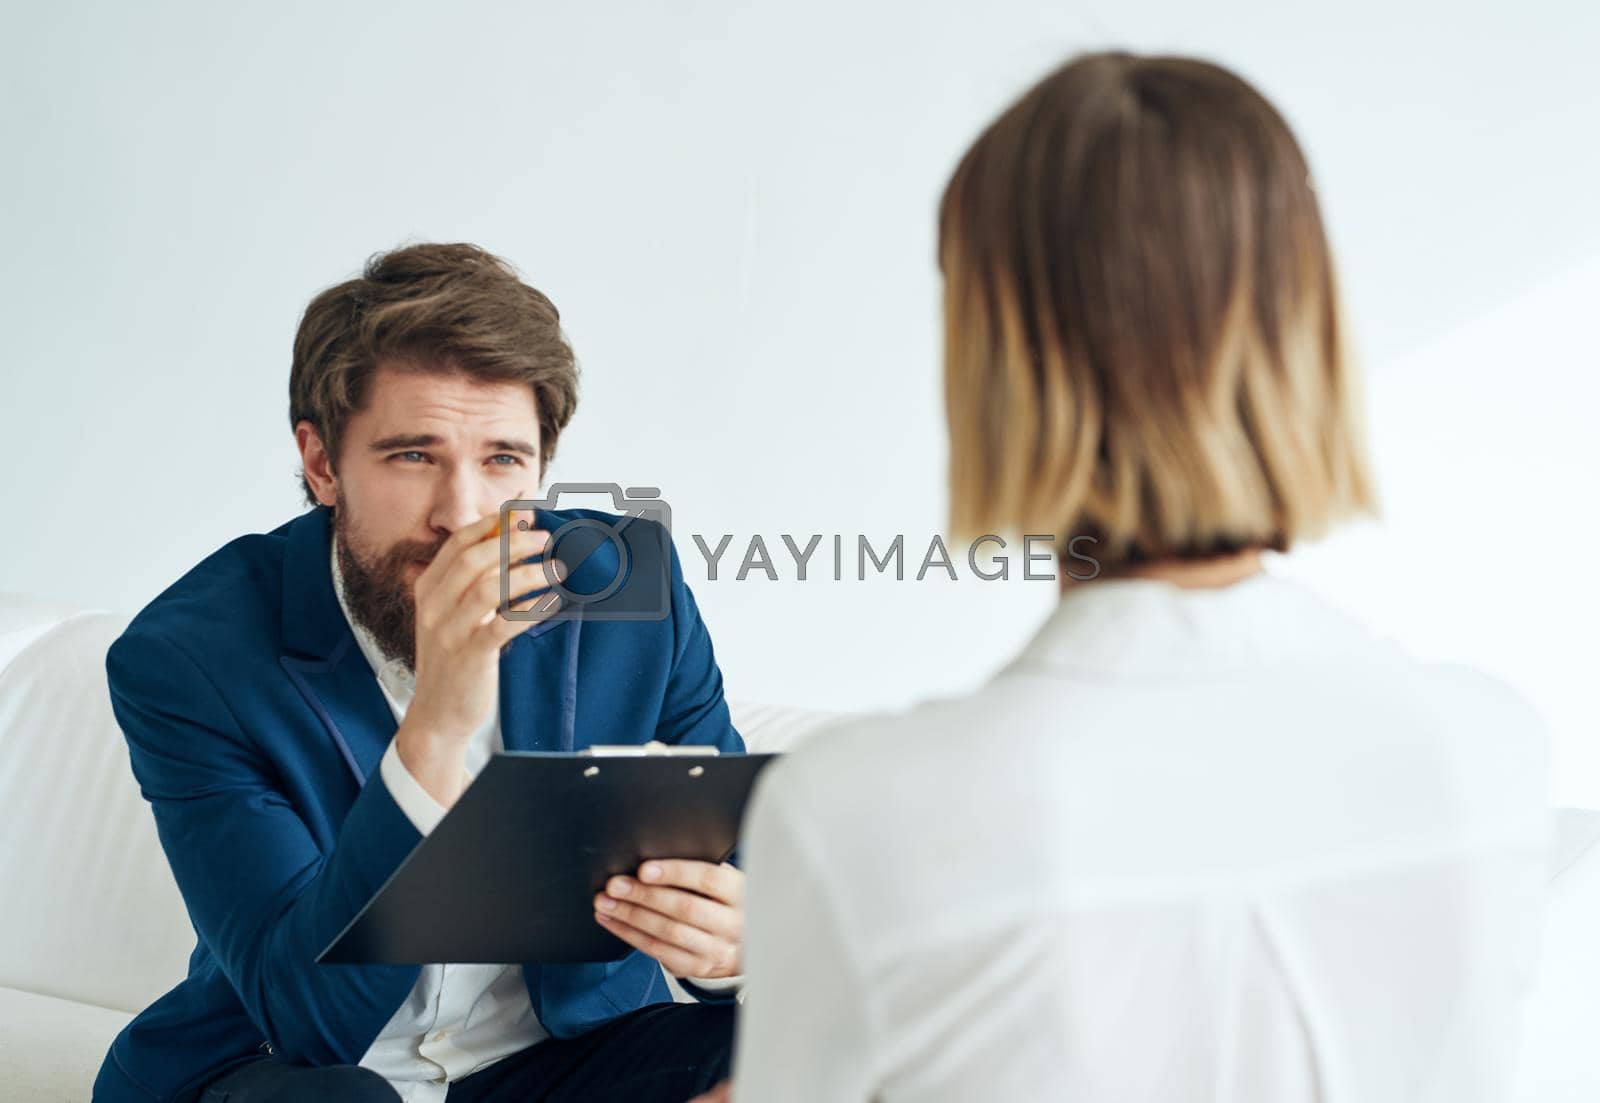 business man and woman communication officials office documents. High quality photo